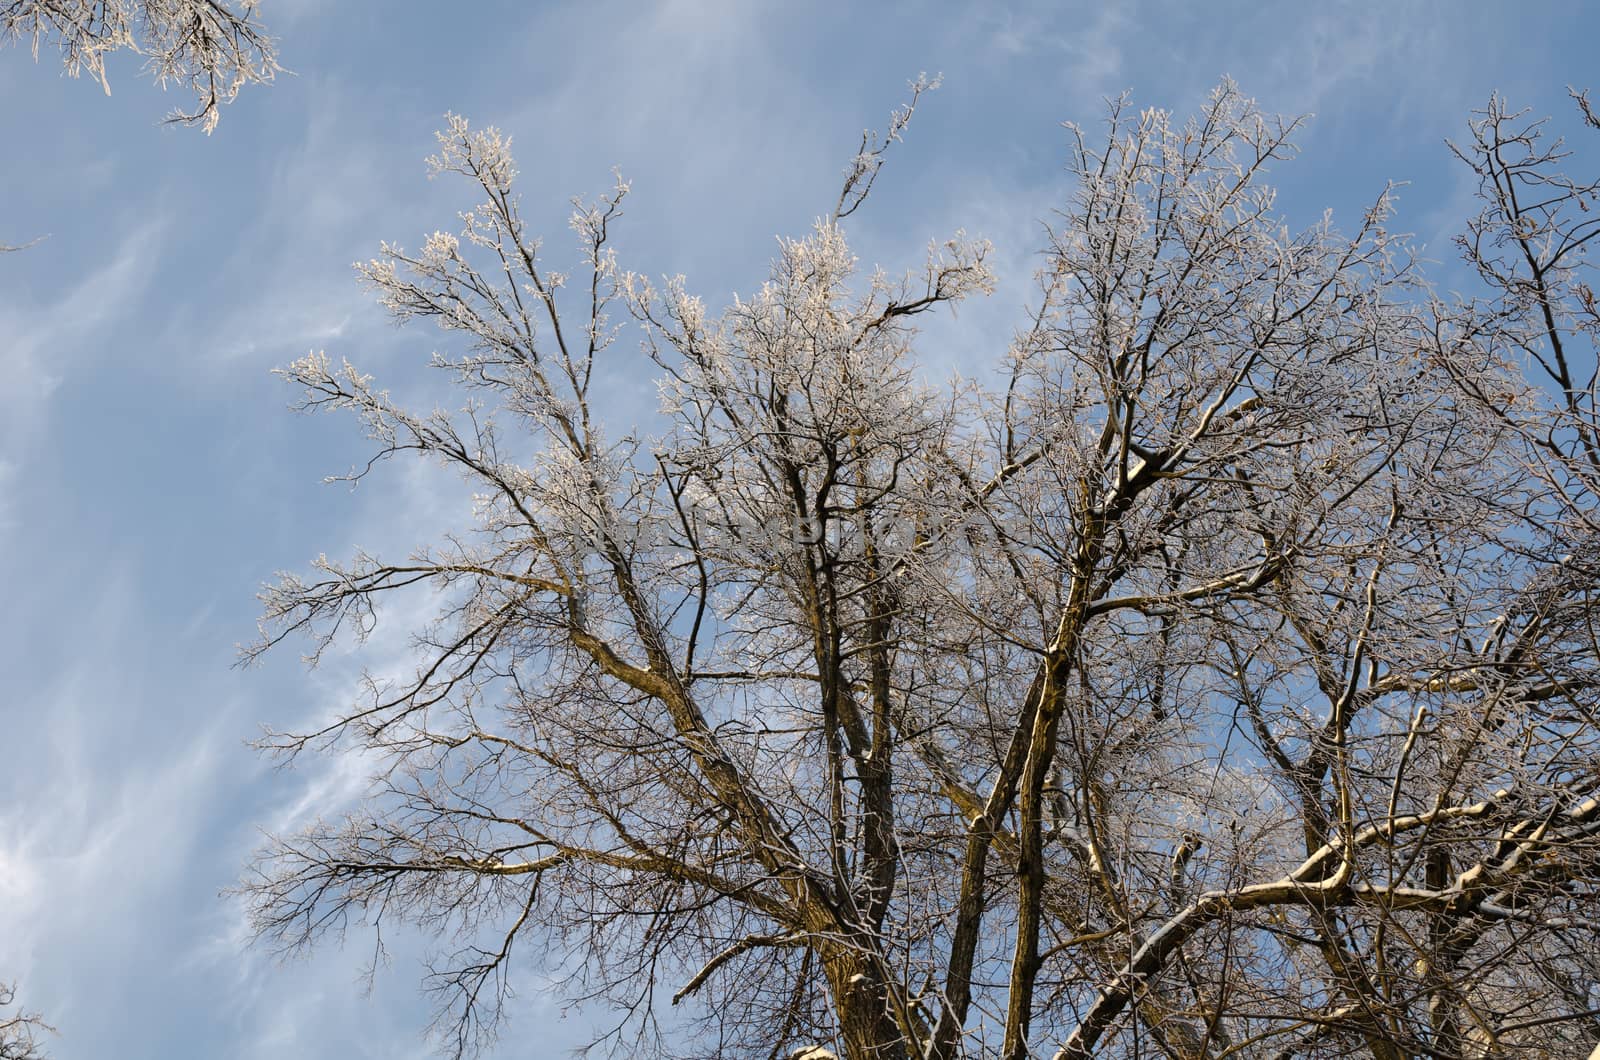 Frozen trees with blue sky background by nemo269